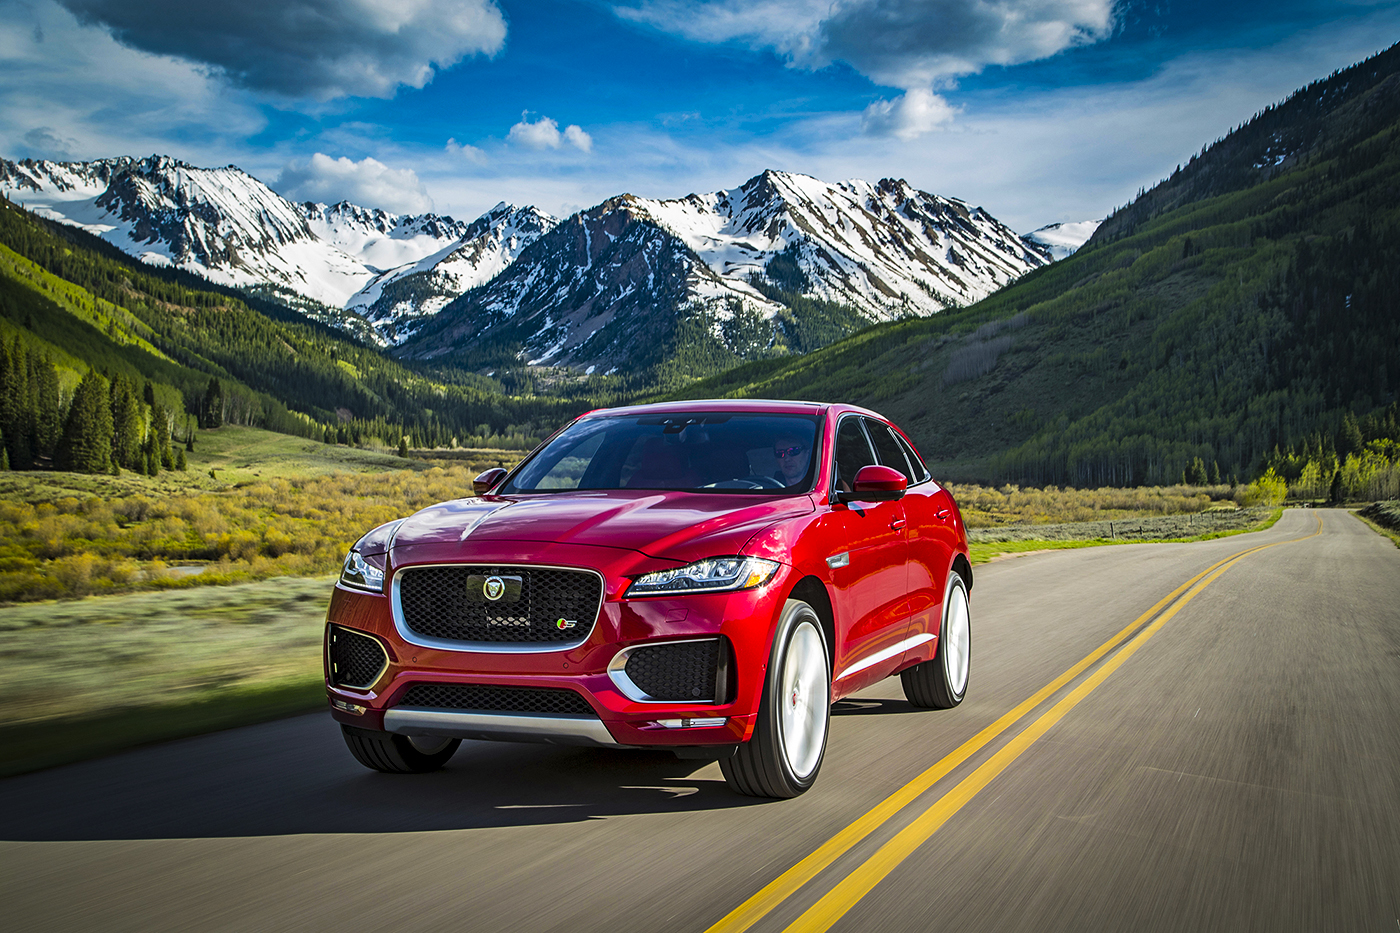 Driven: 2017 Jaguar F-Pace, the big cat is ready to prowl